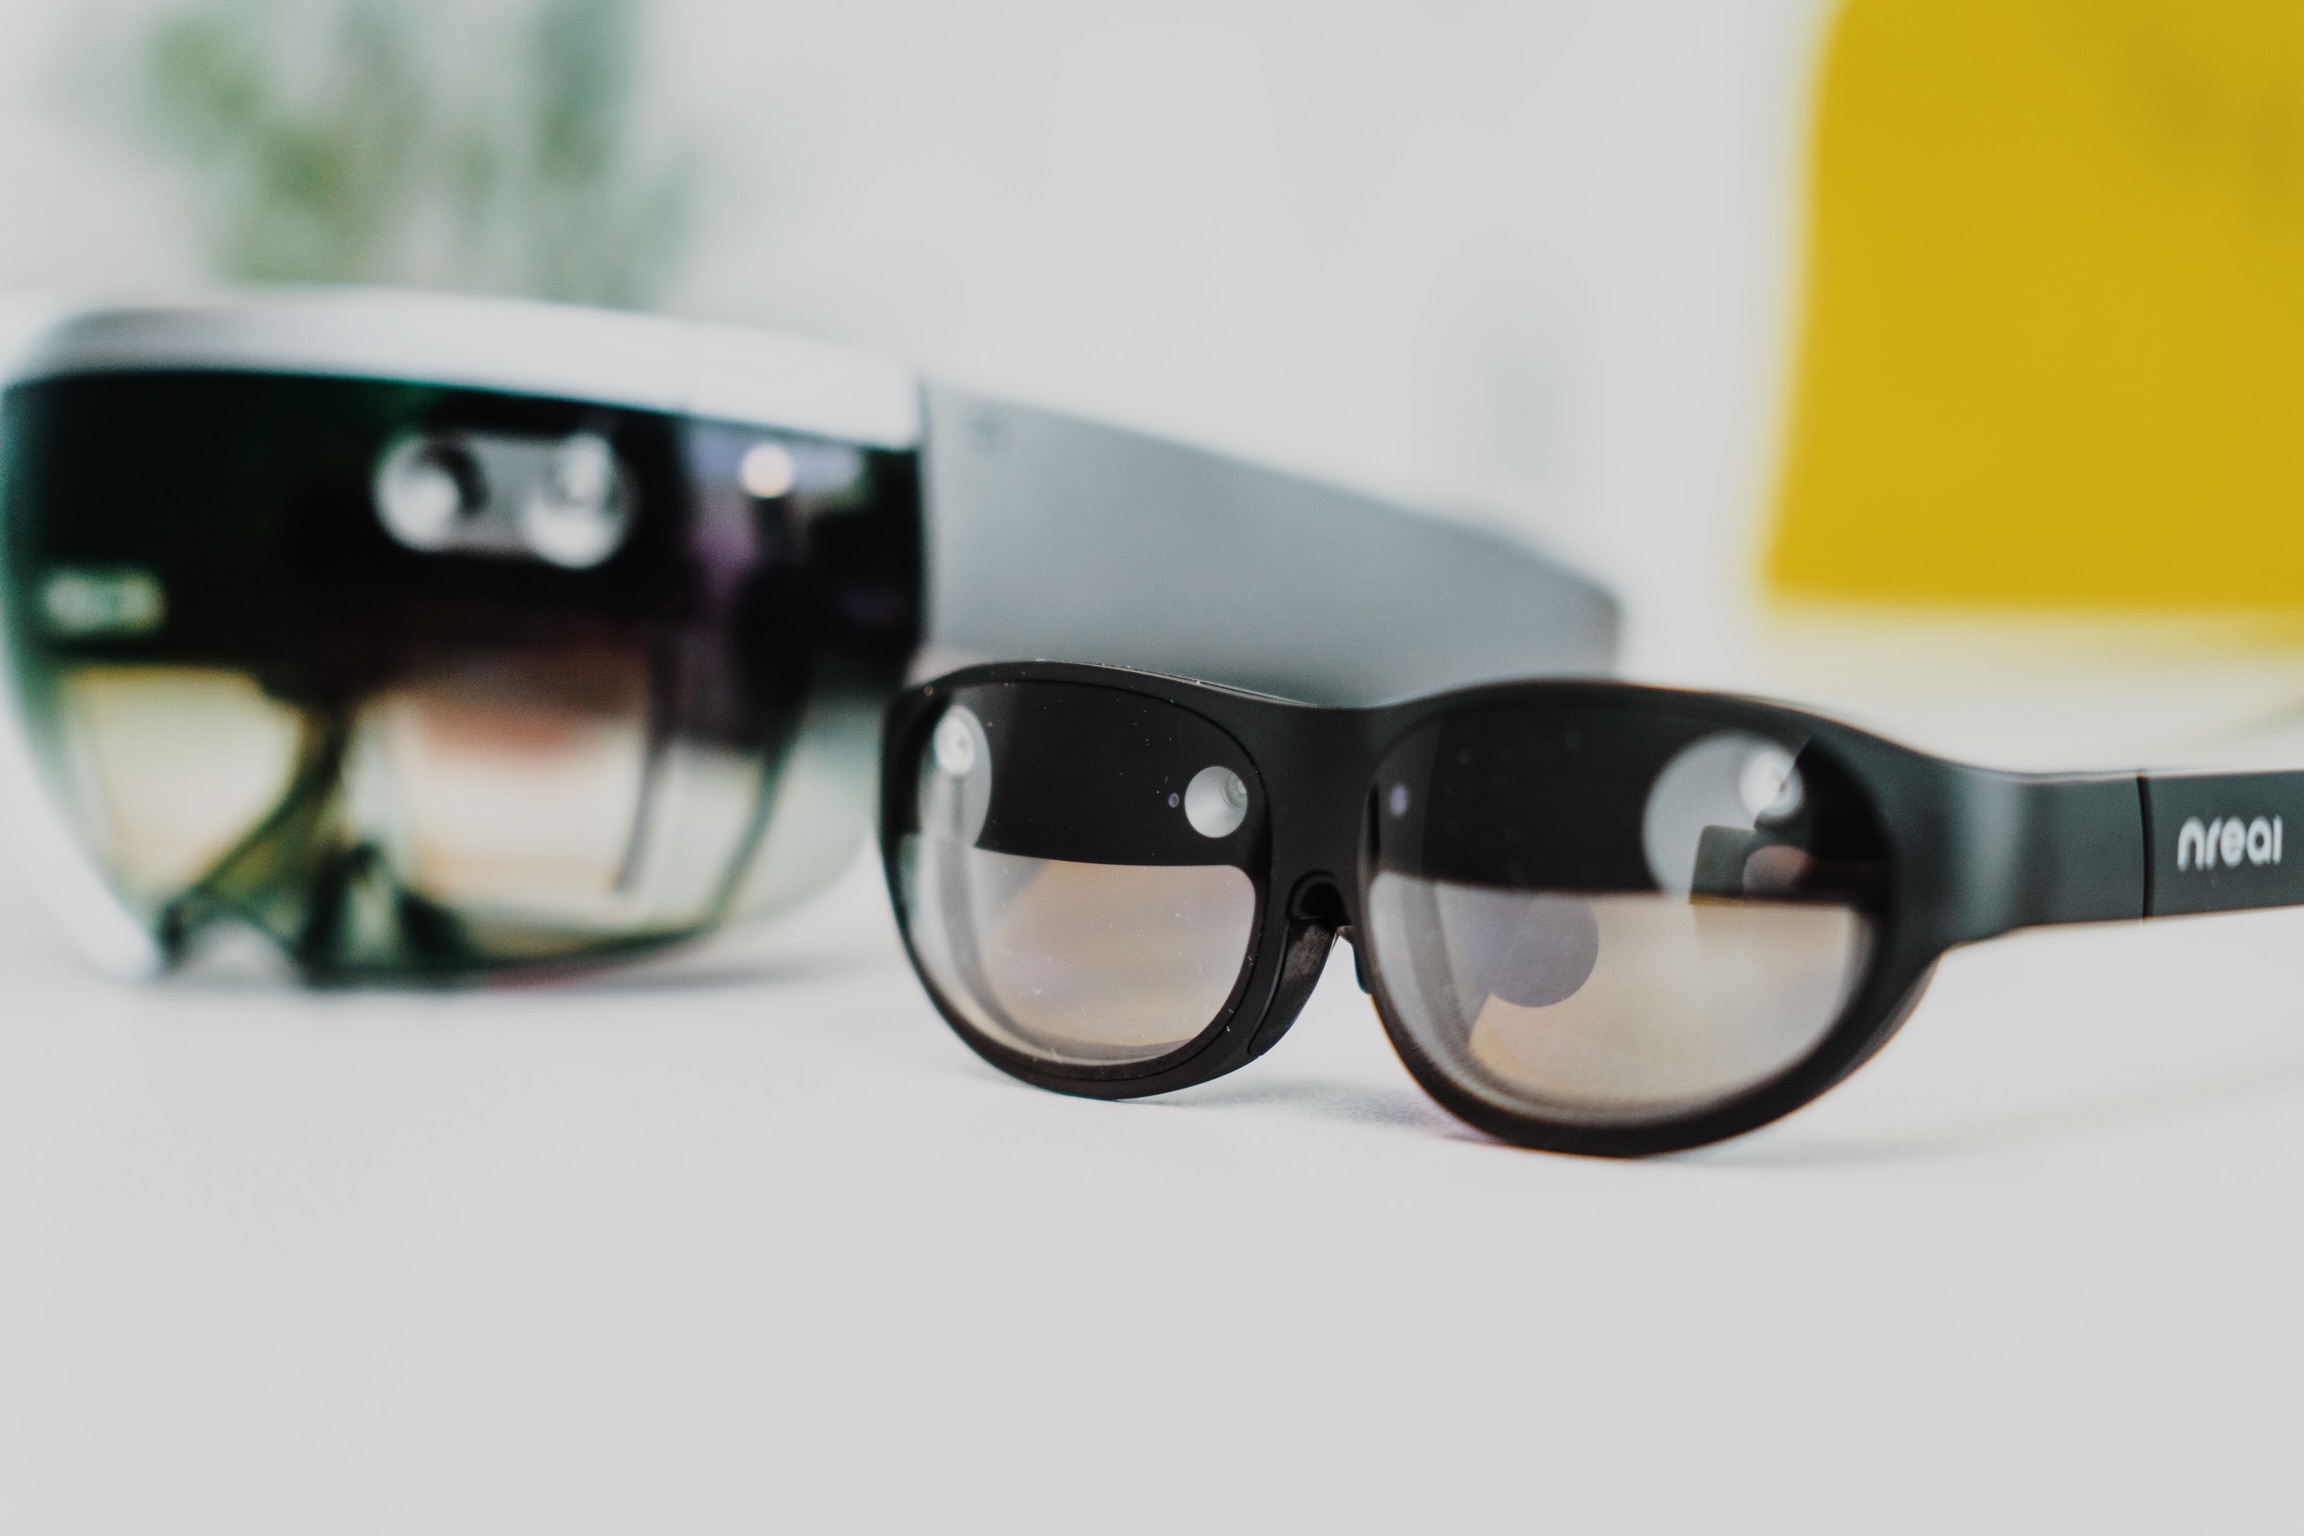 Augmented reality glasses are the tool to break language barriers in our lives.